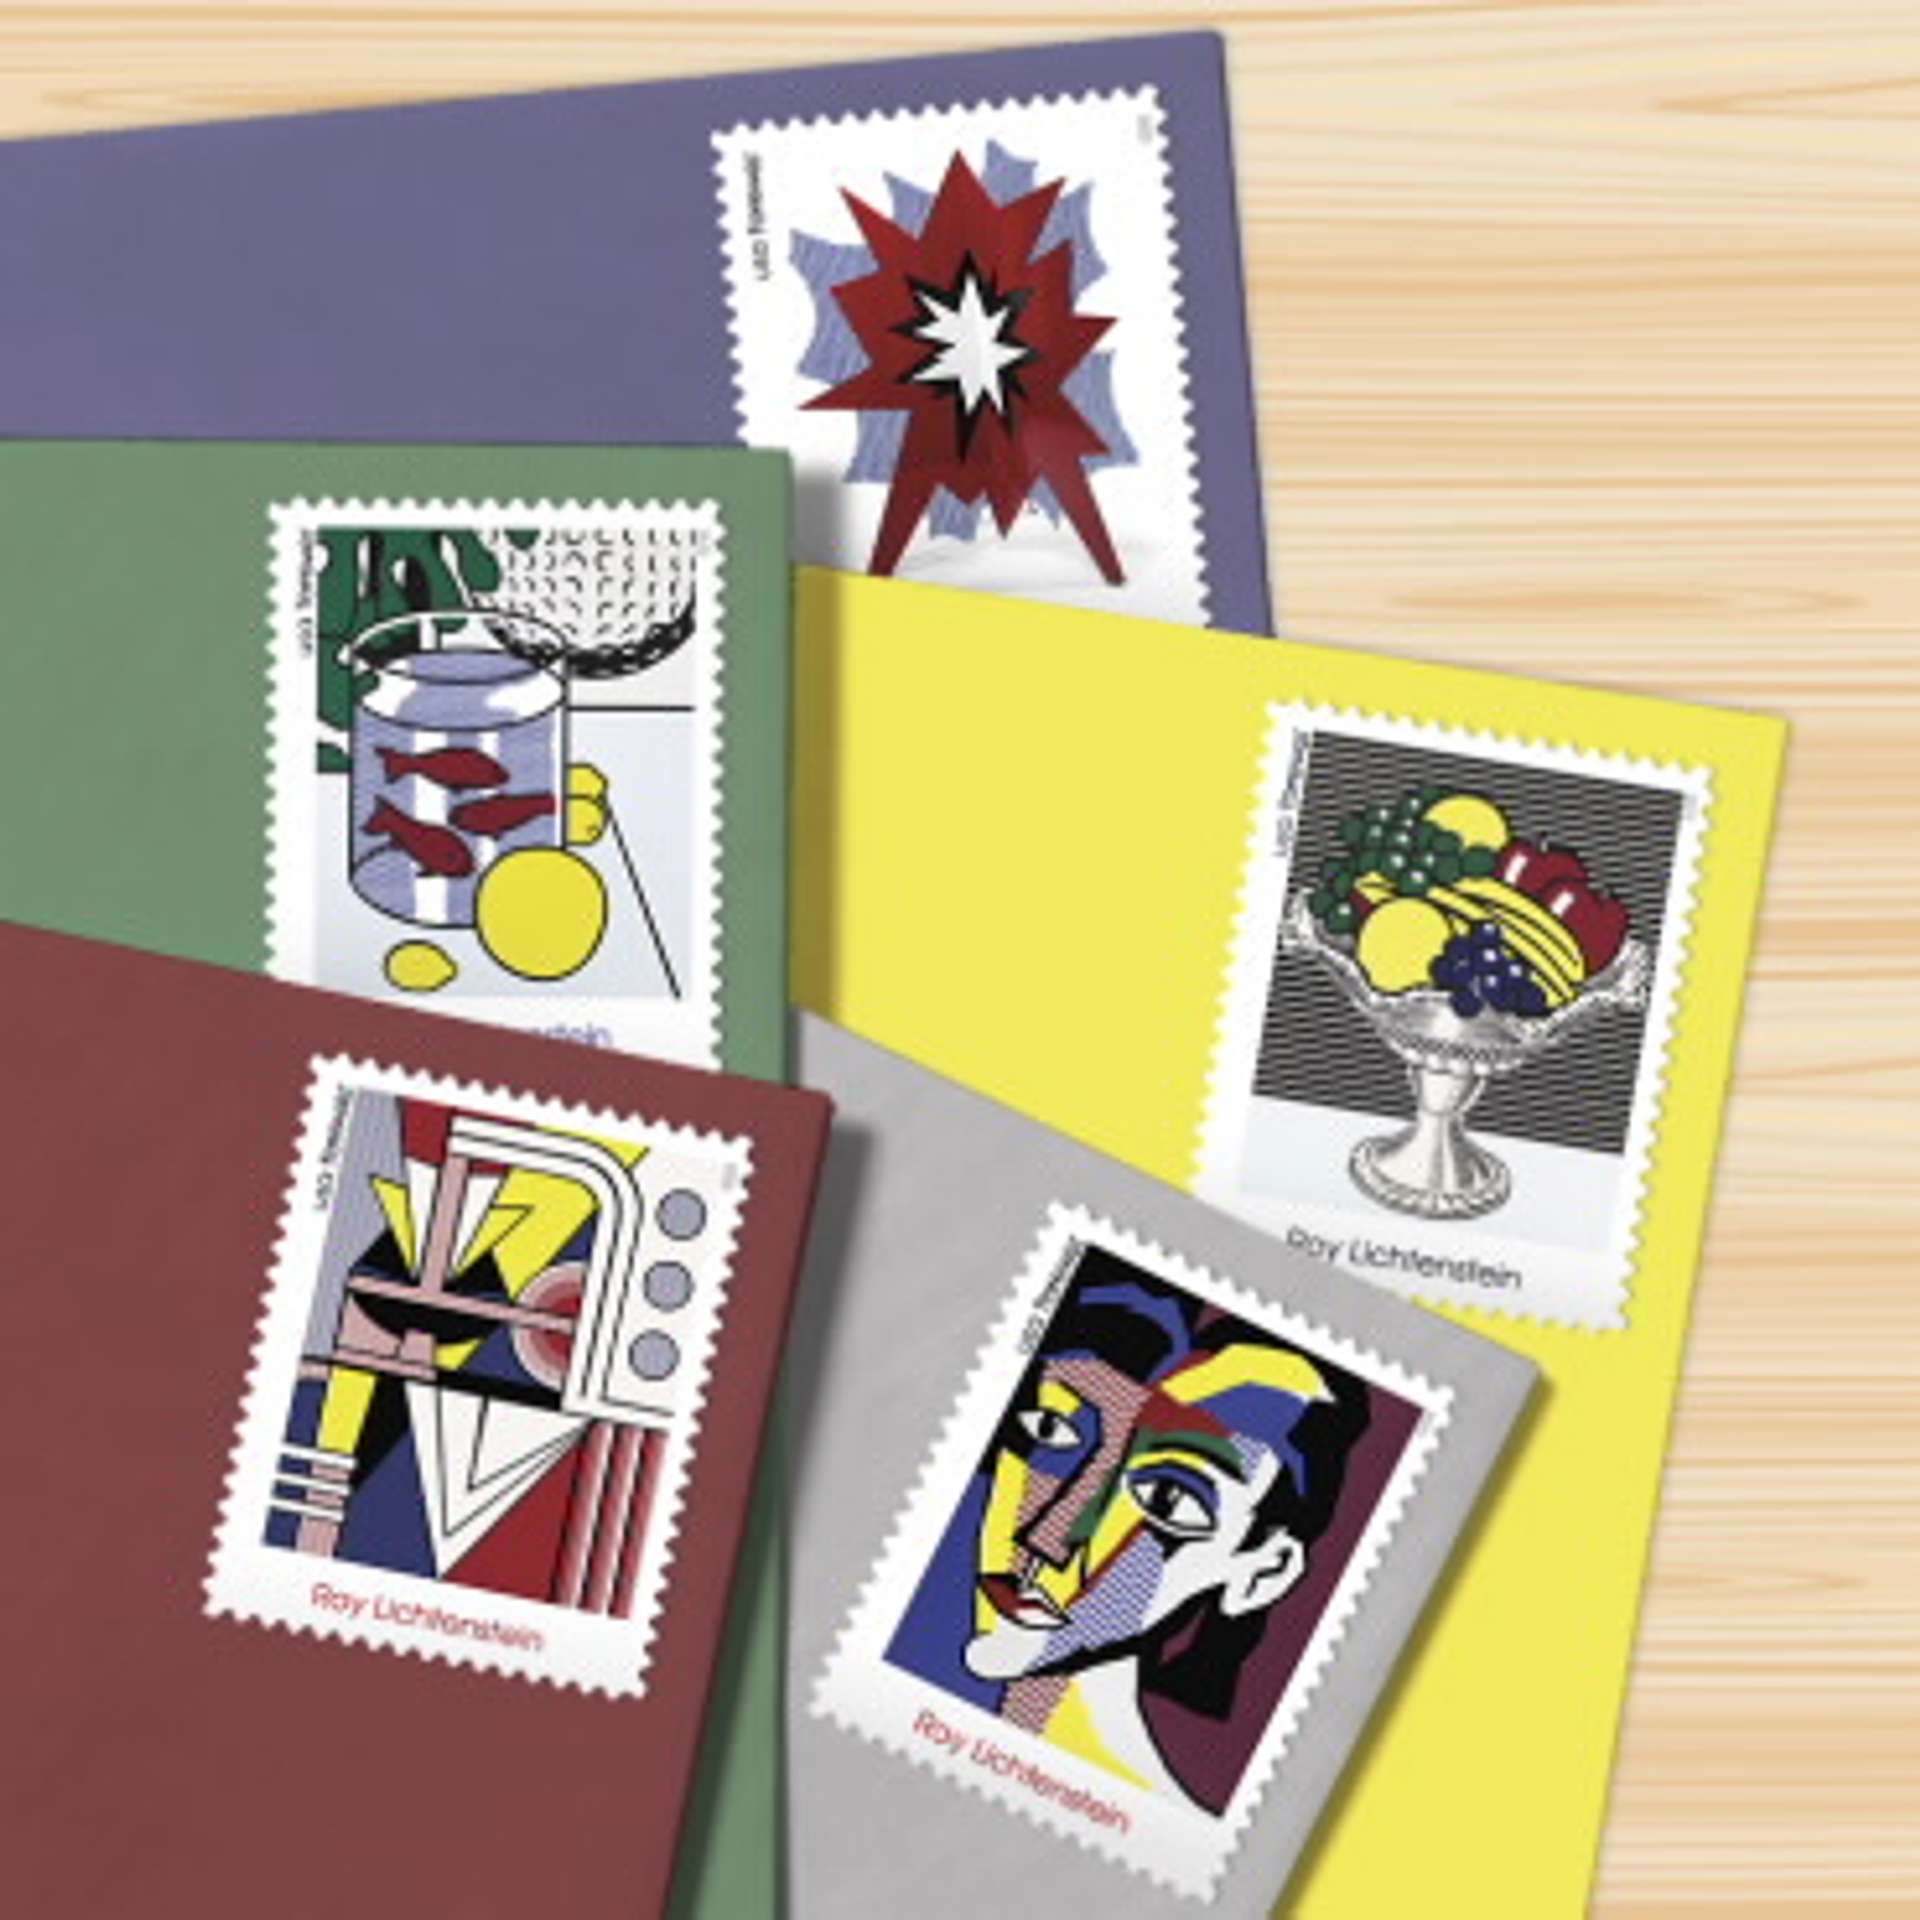 A photograph demonstrating five of the Roy Lichtenstein American postage stamps, with reproductions of Lichtenstein's work